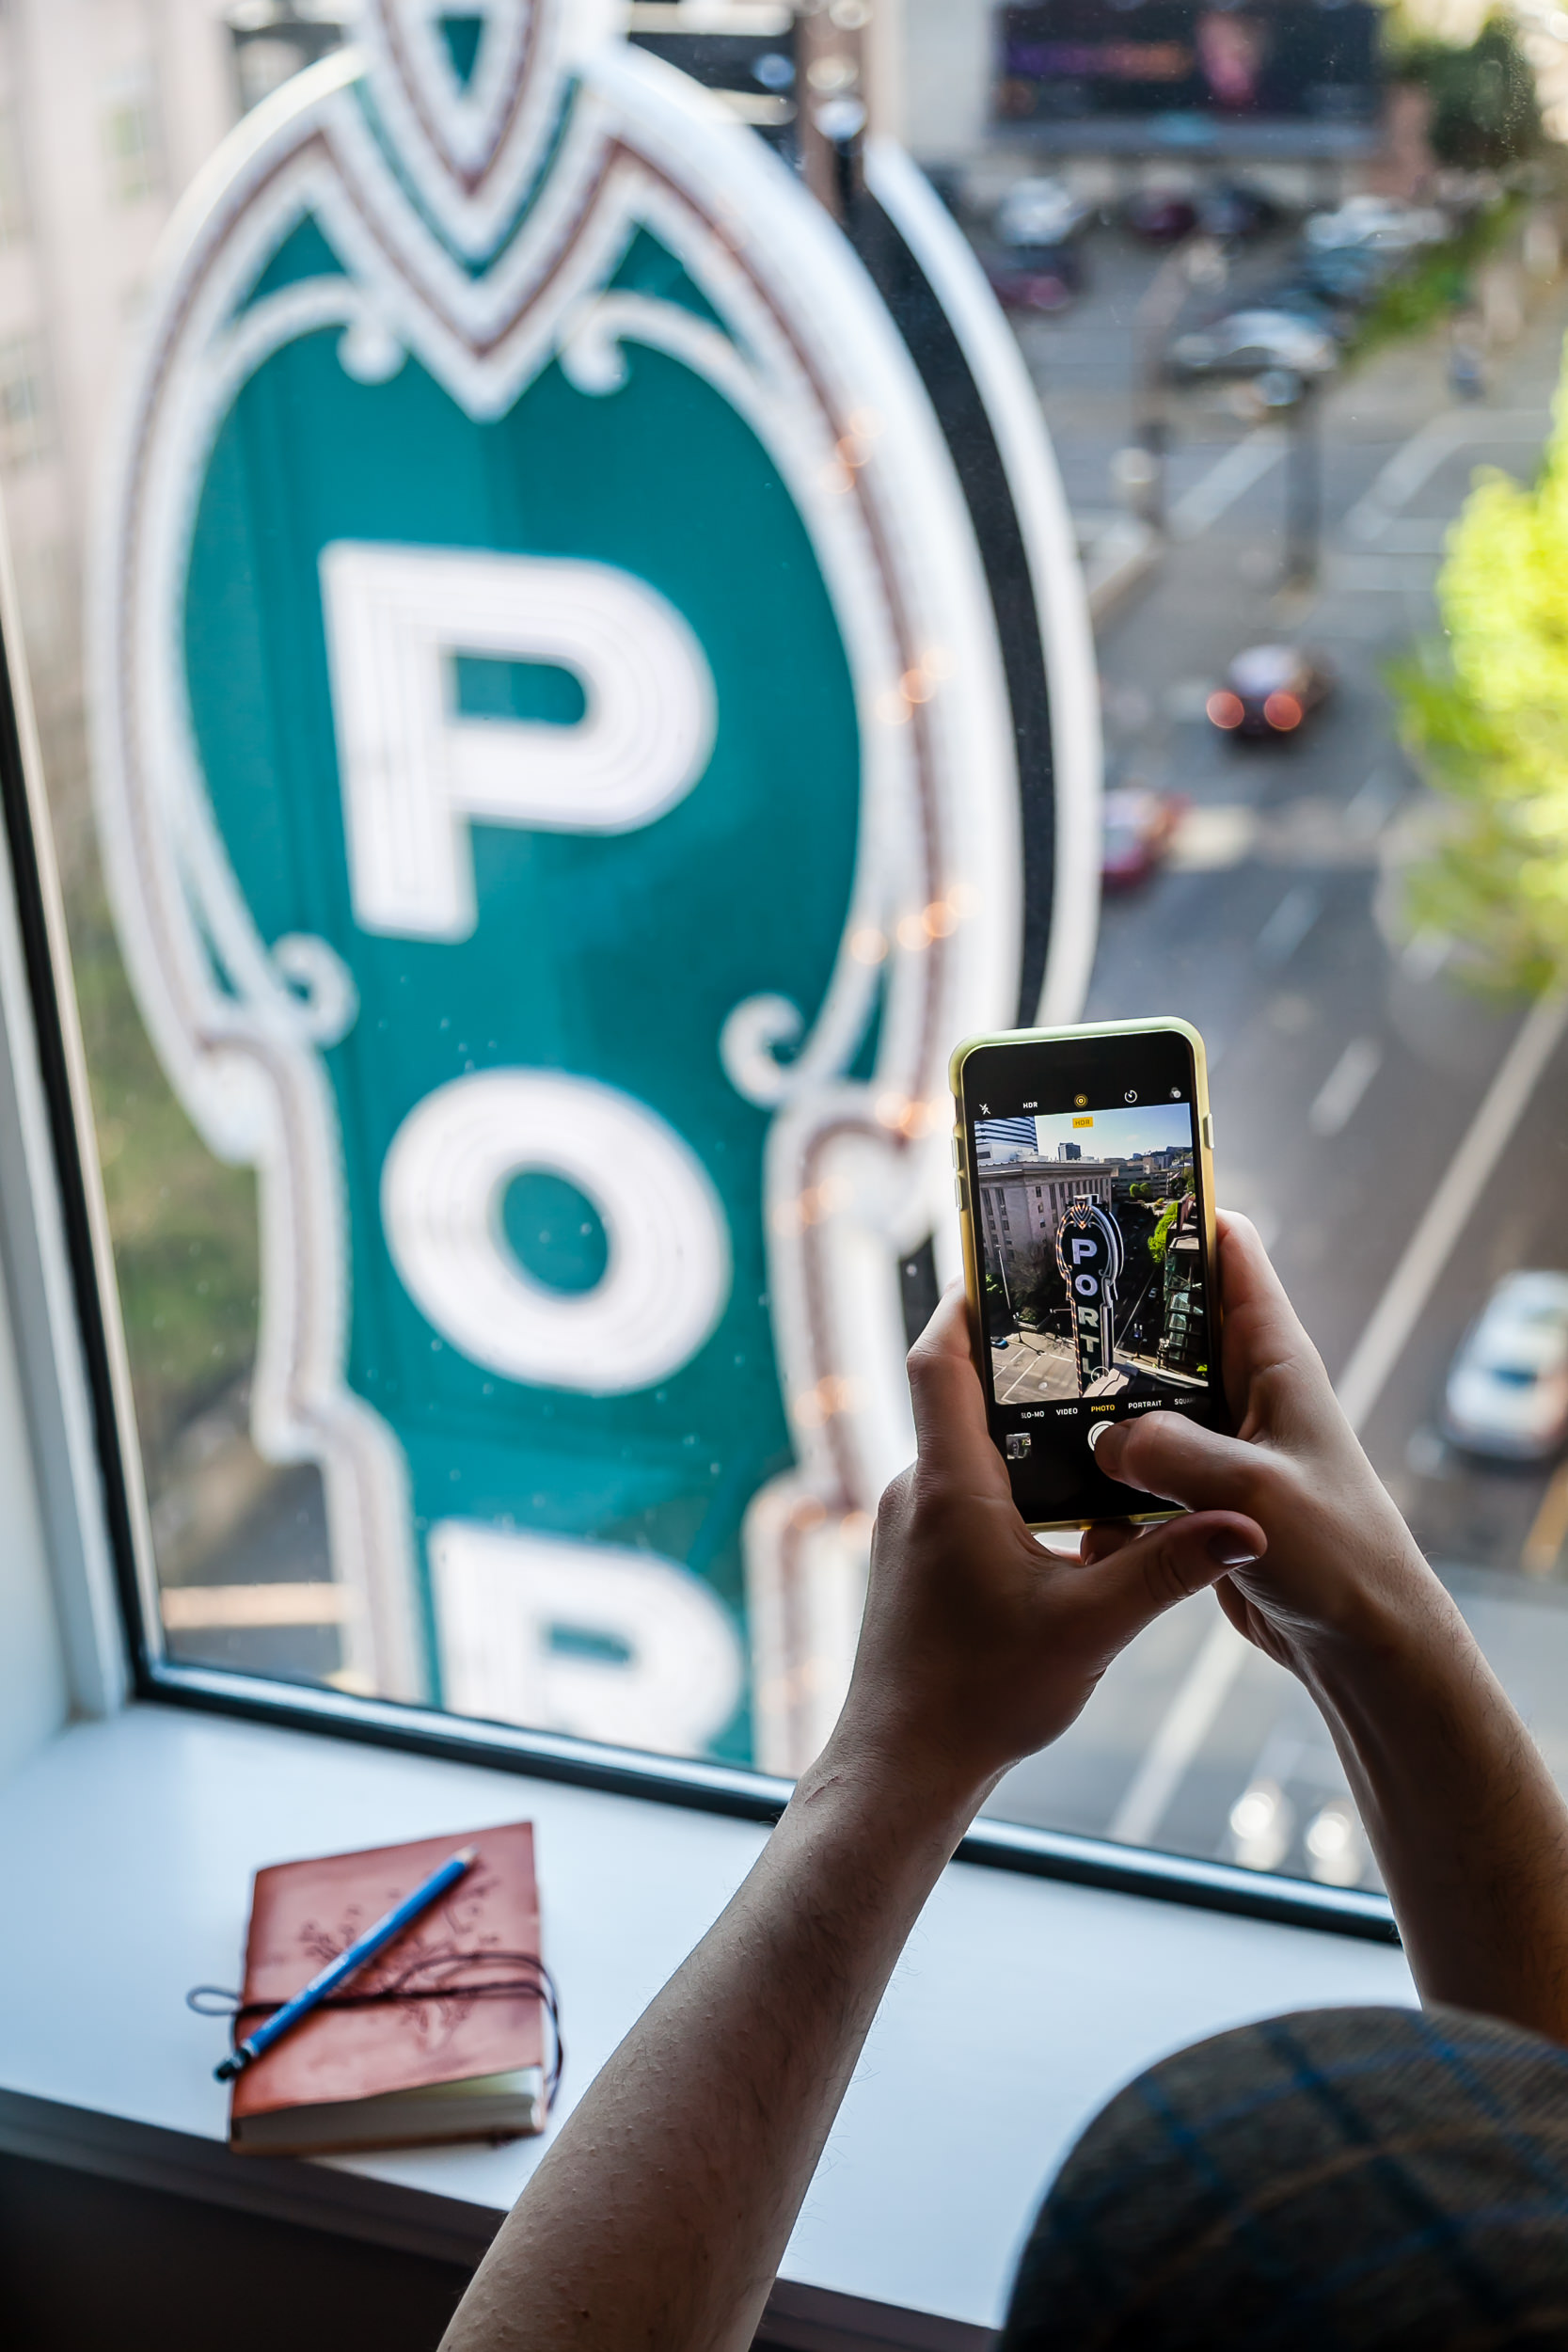 Someone talking a picture of the vertical Portland sign from their hotel room window.